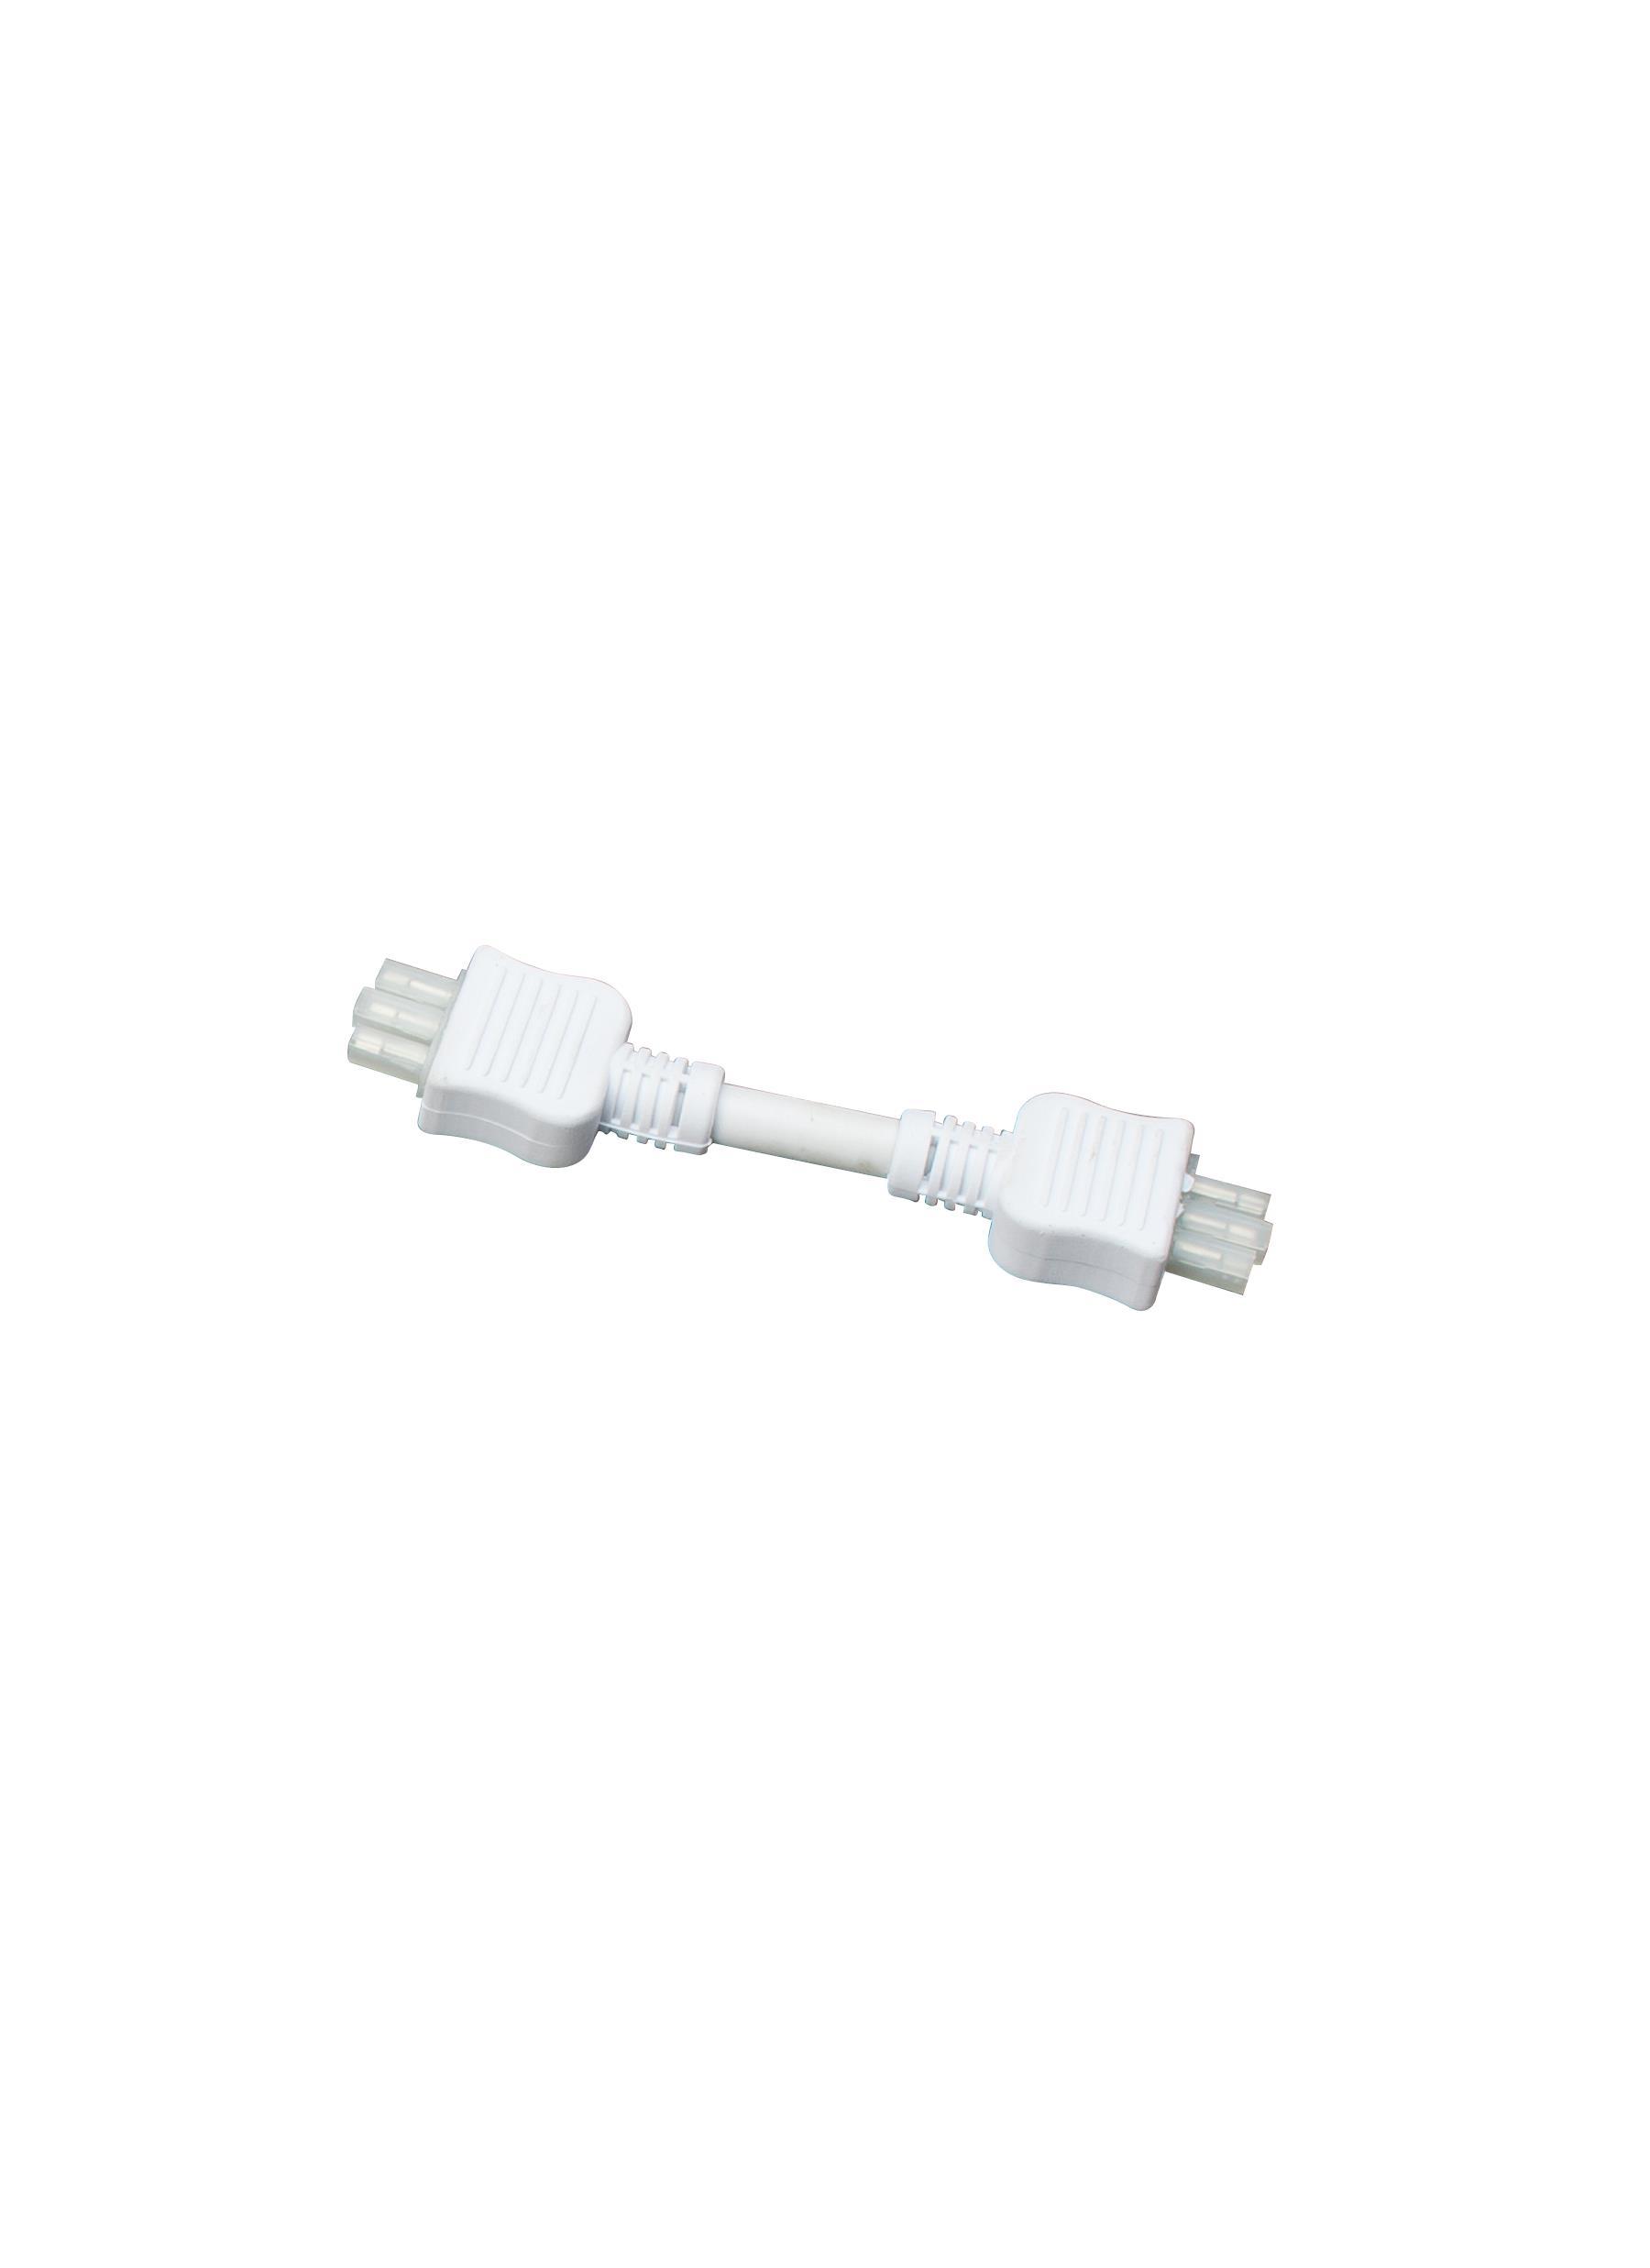 6 Inch Connector Cord - White Under Cabinet Lighting Sea Gull Lighting 